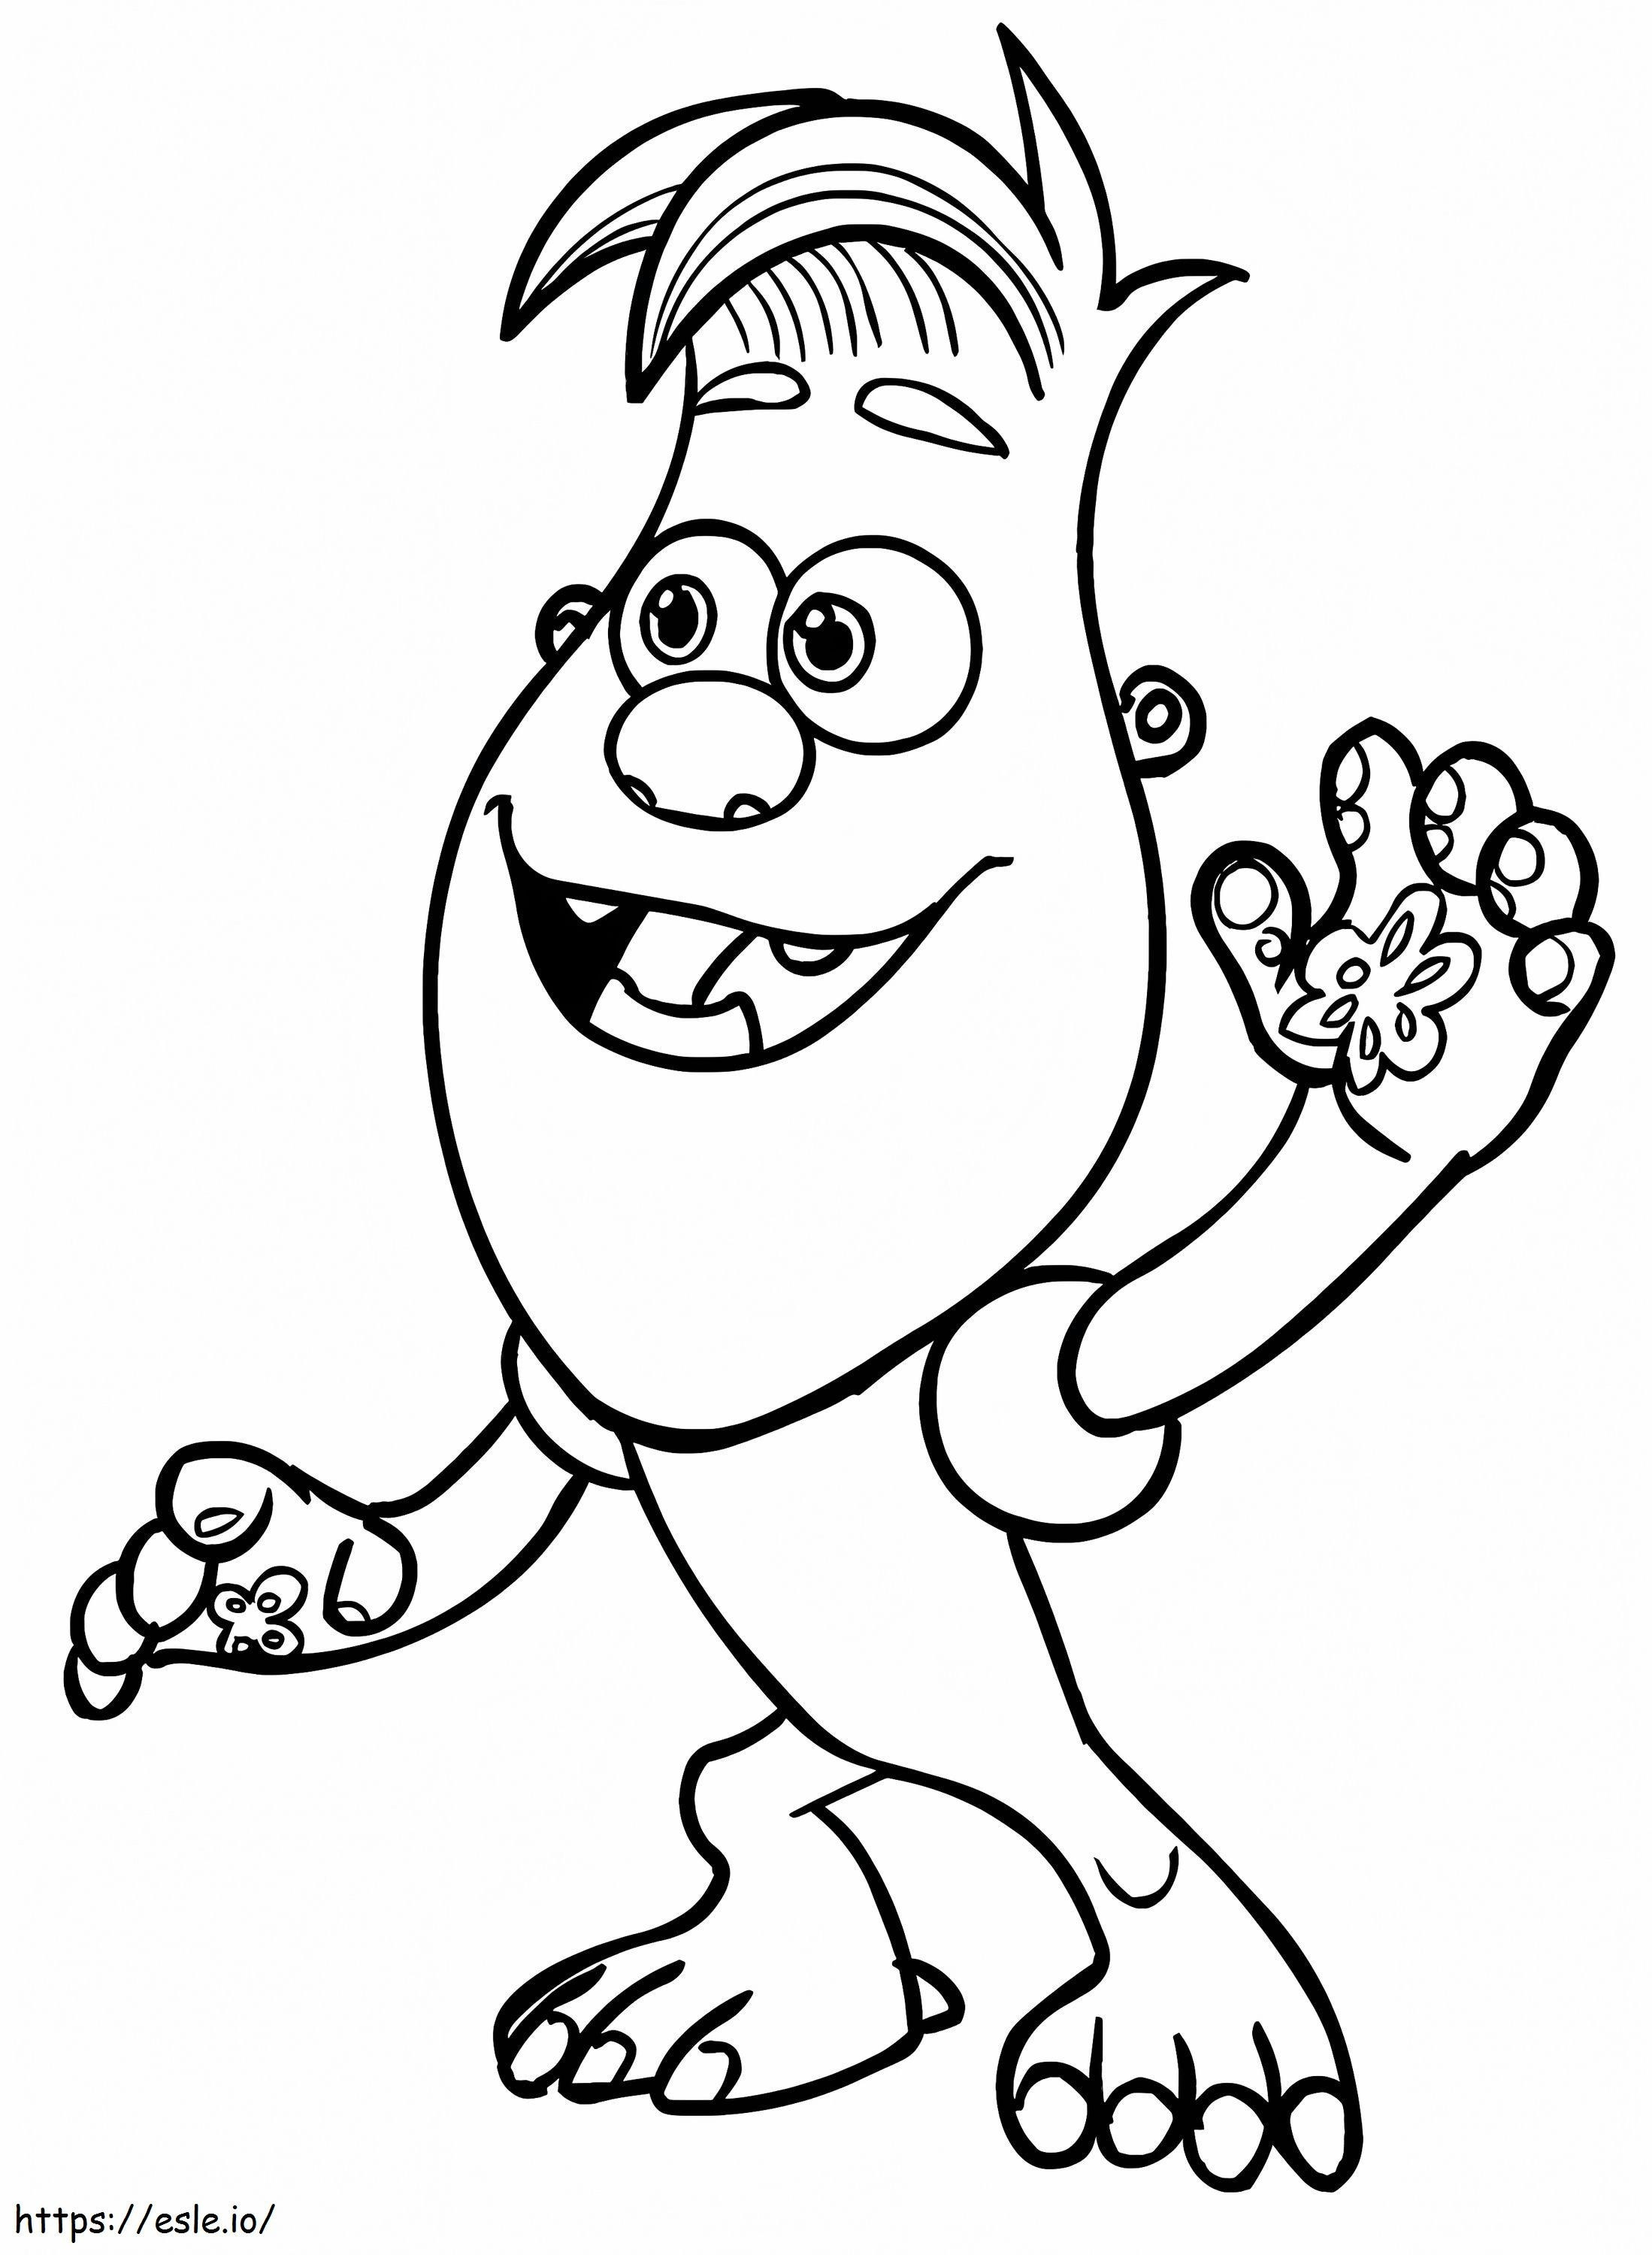 1586766805 Stomper coloring page